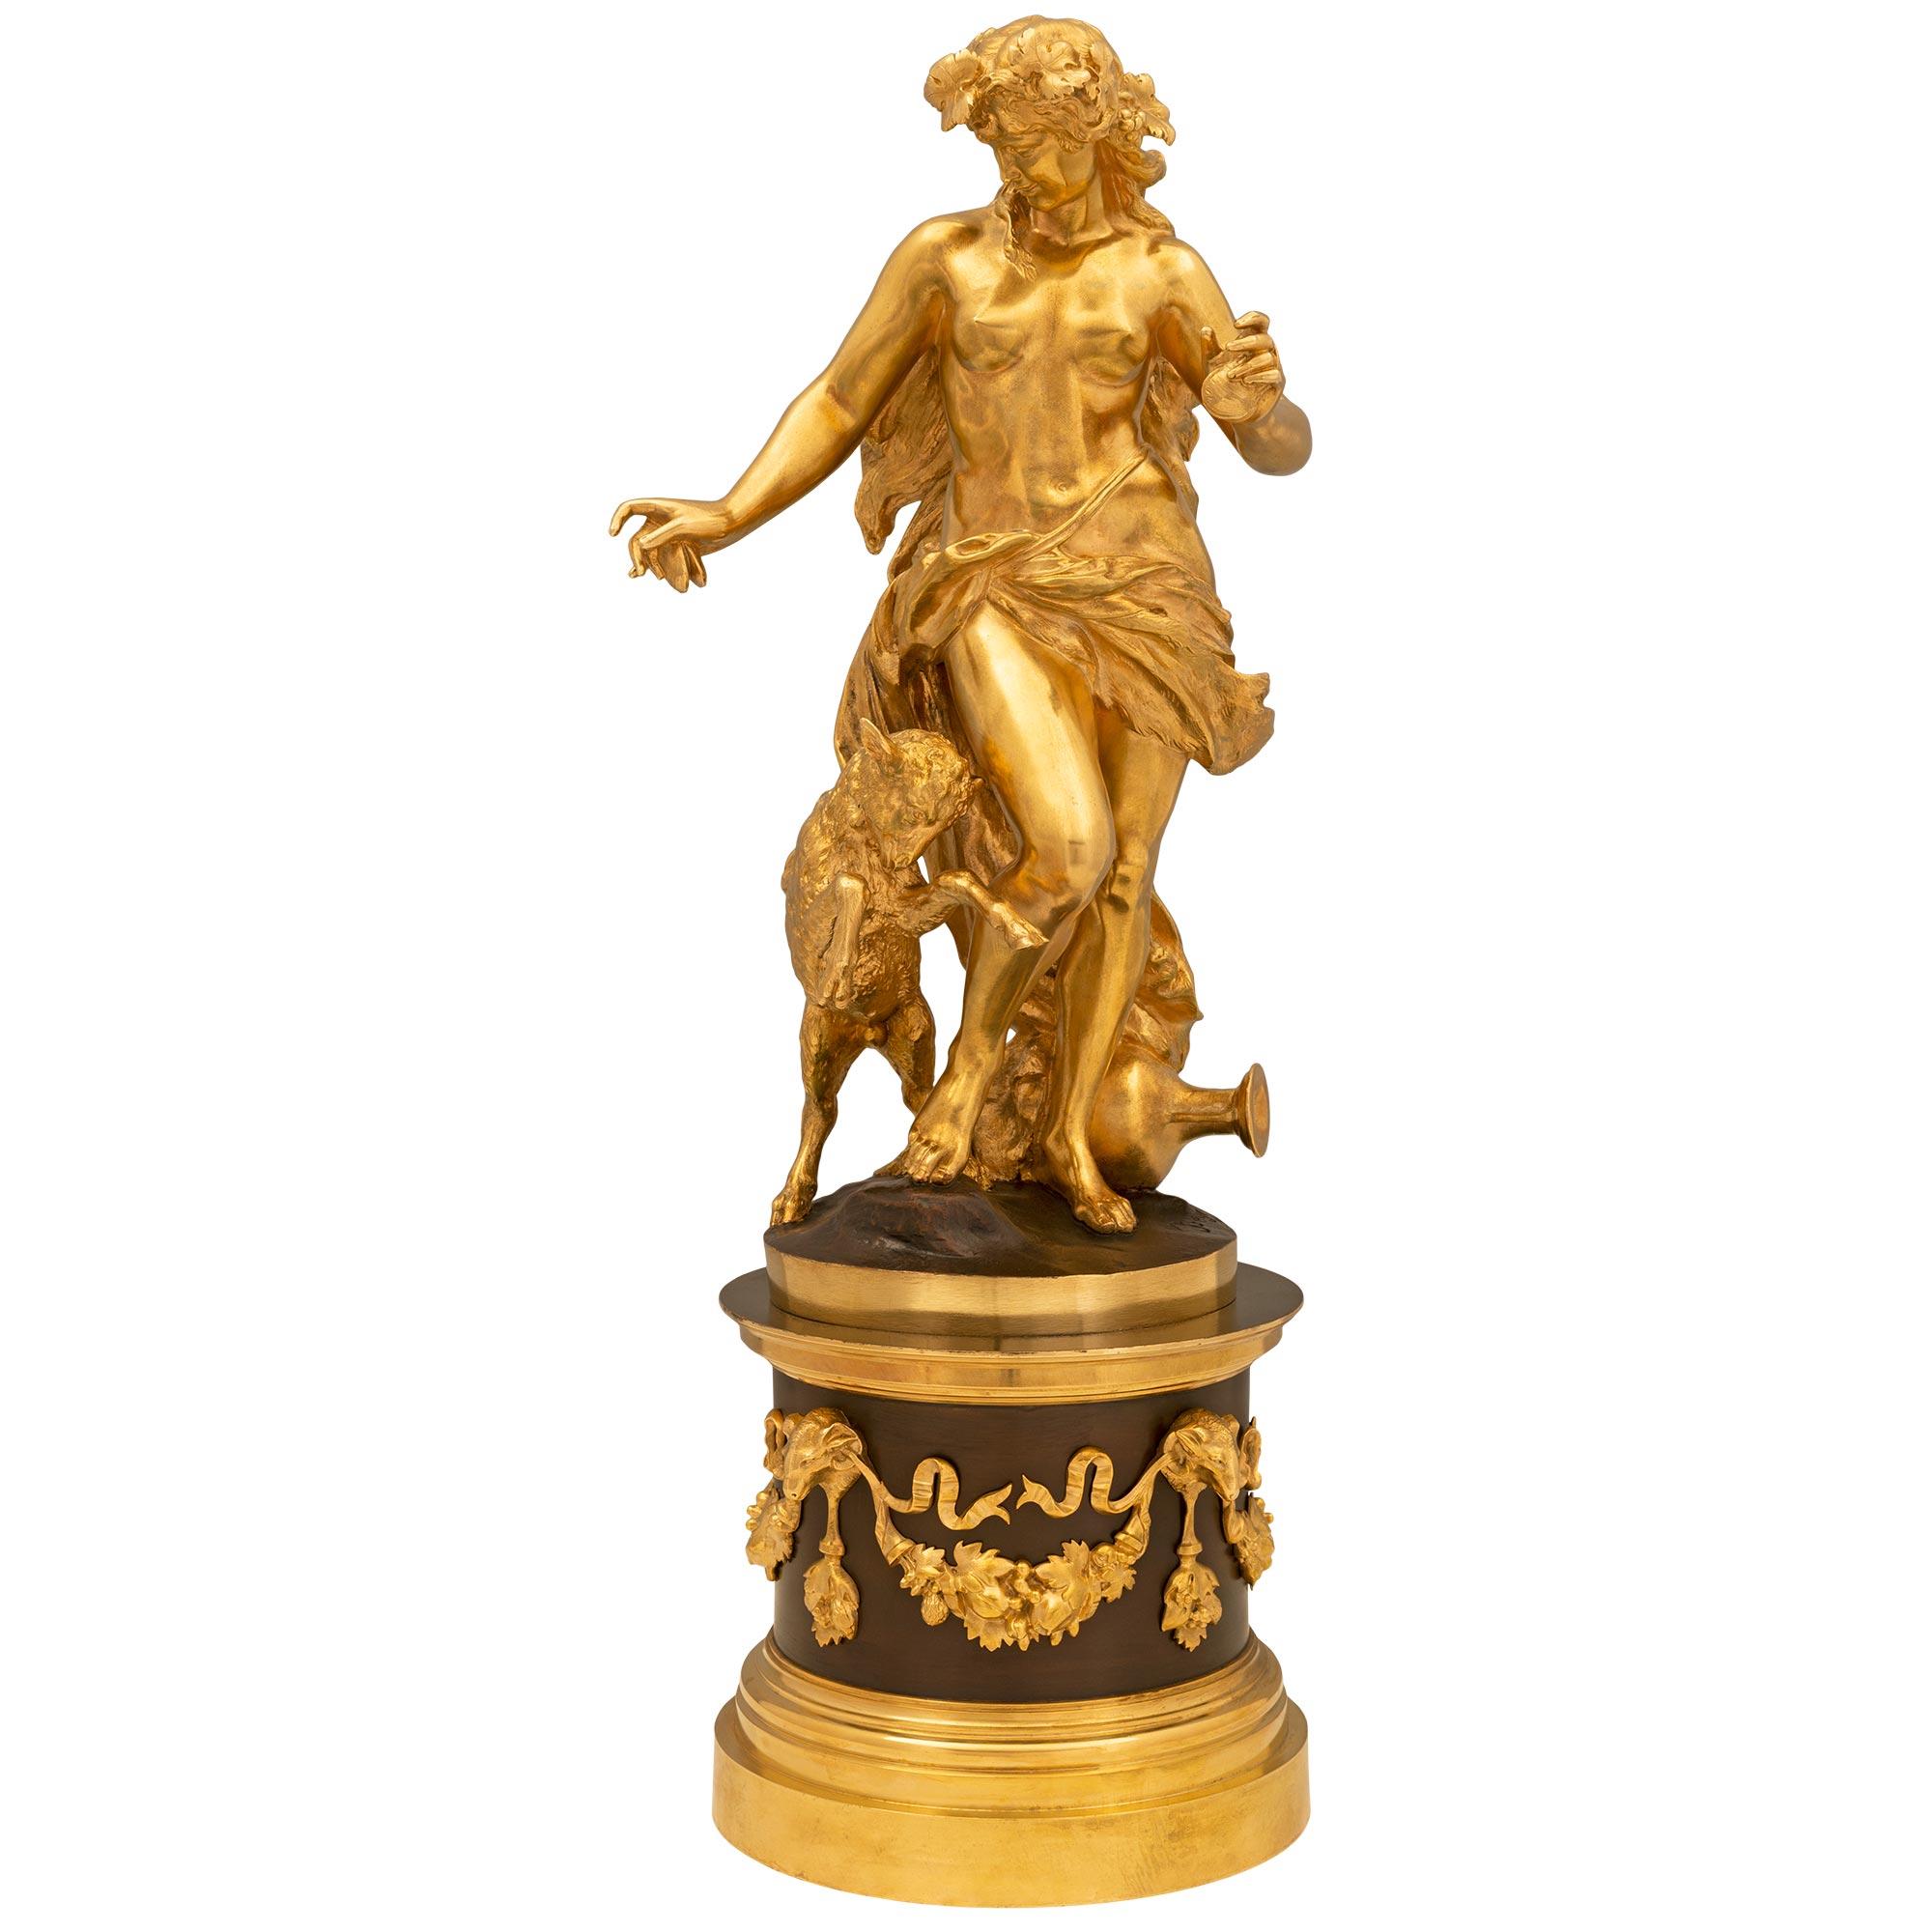 A remarkable and most decorative French 19th century Louis XVI st. ormolu and patinated bronze statue. The statue is raised by an elegant stepped circular ormolu base below the circular patinated bronze central support adorned with stunning richly